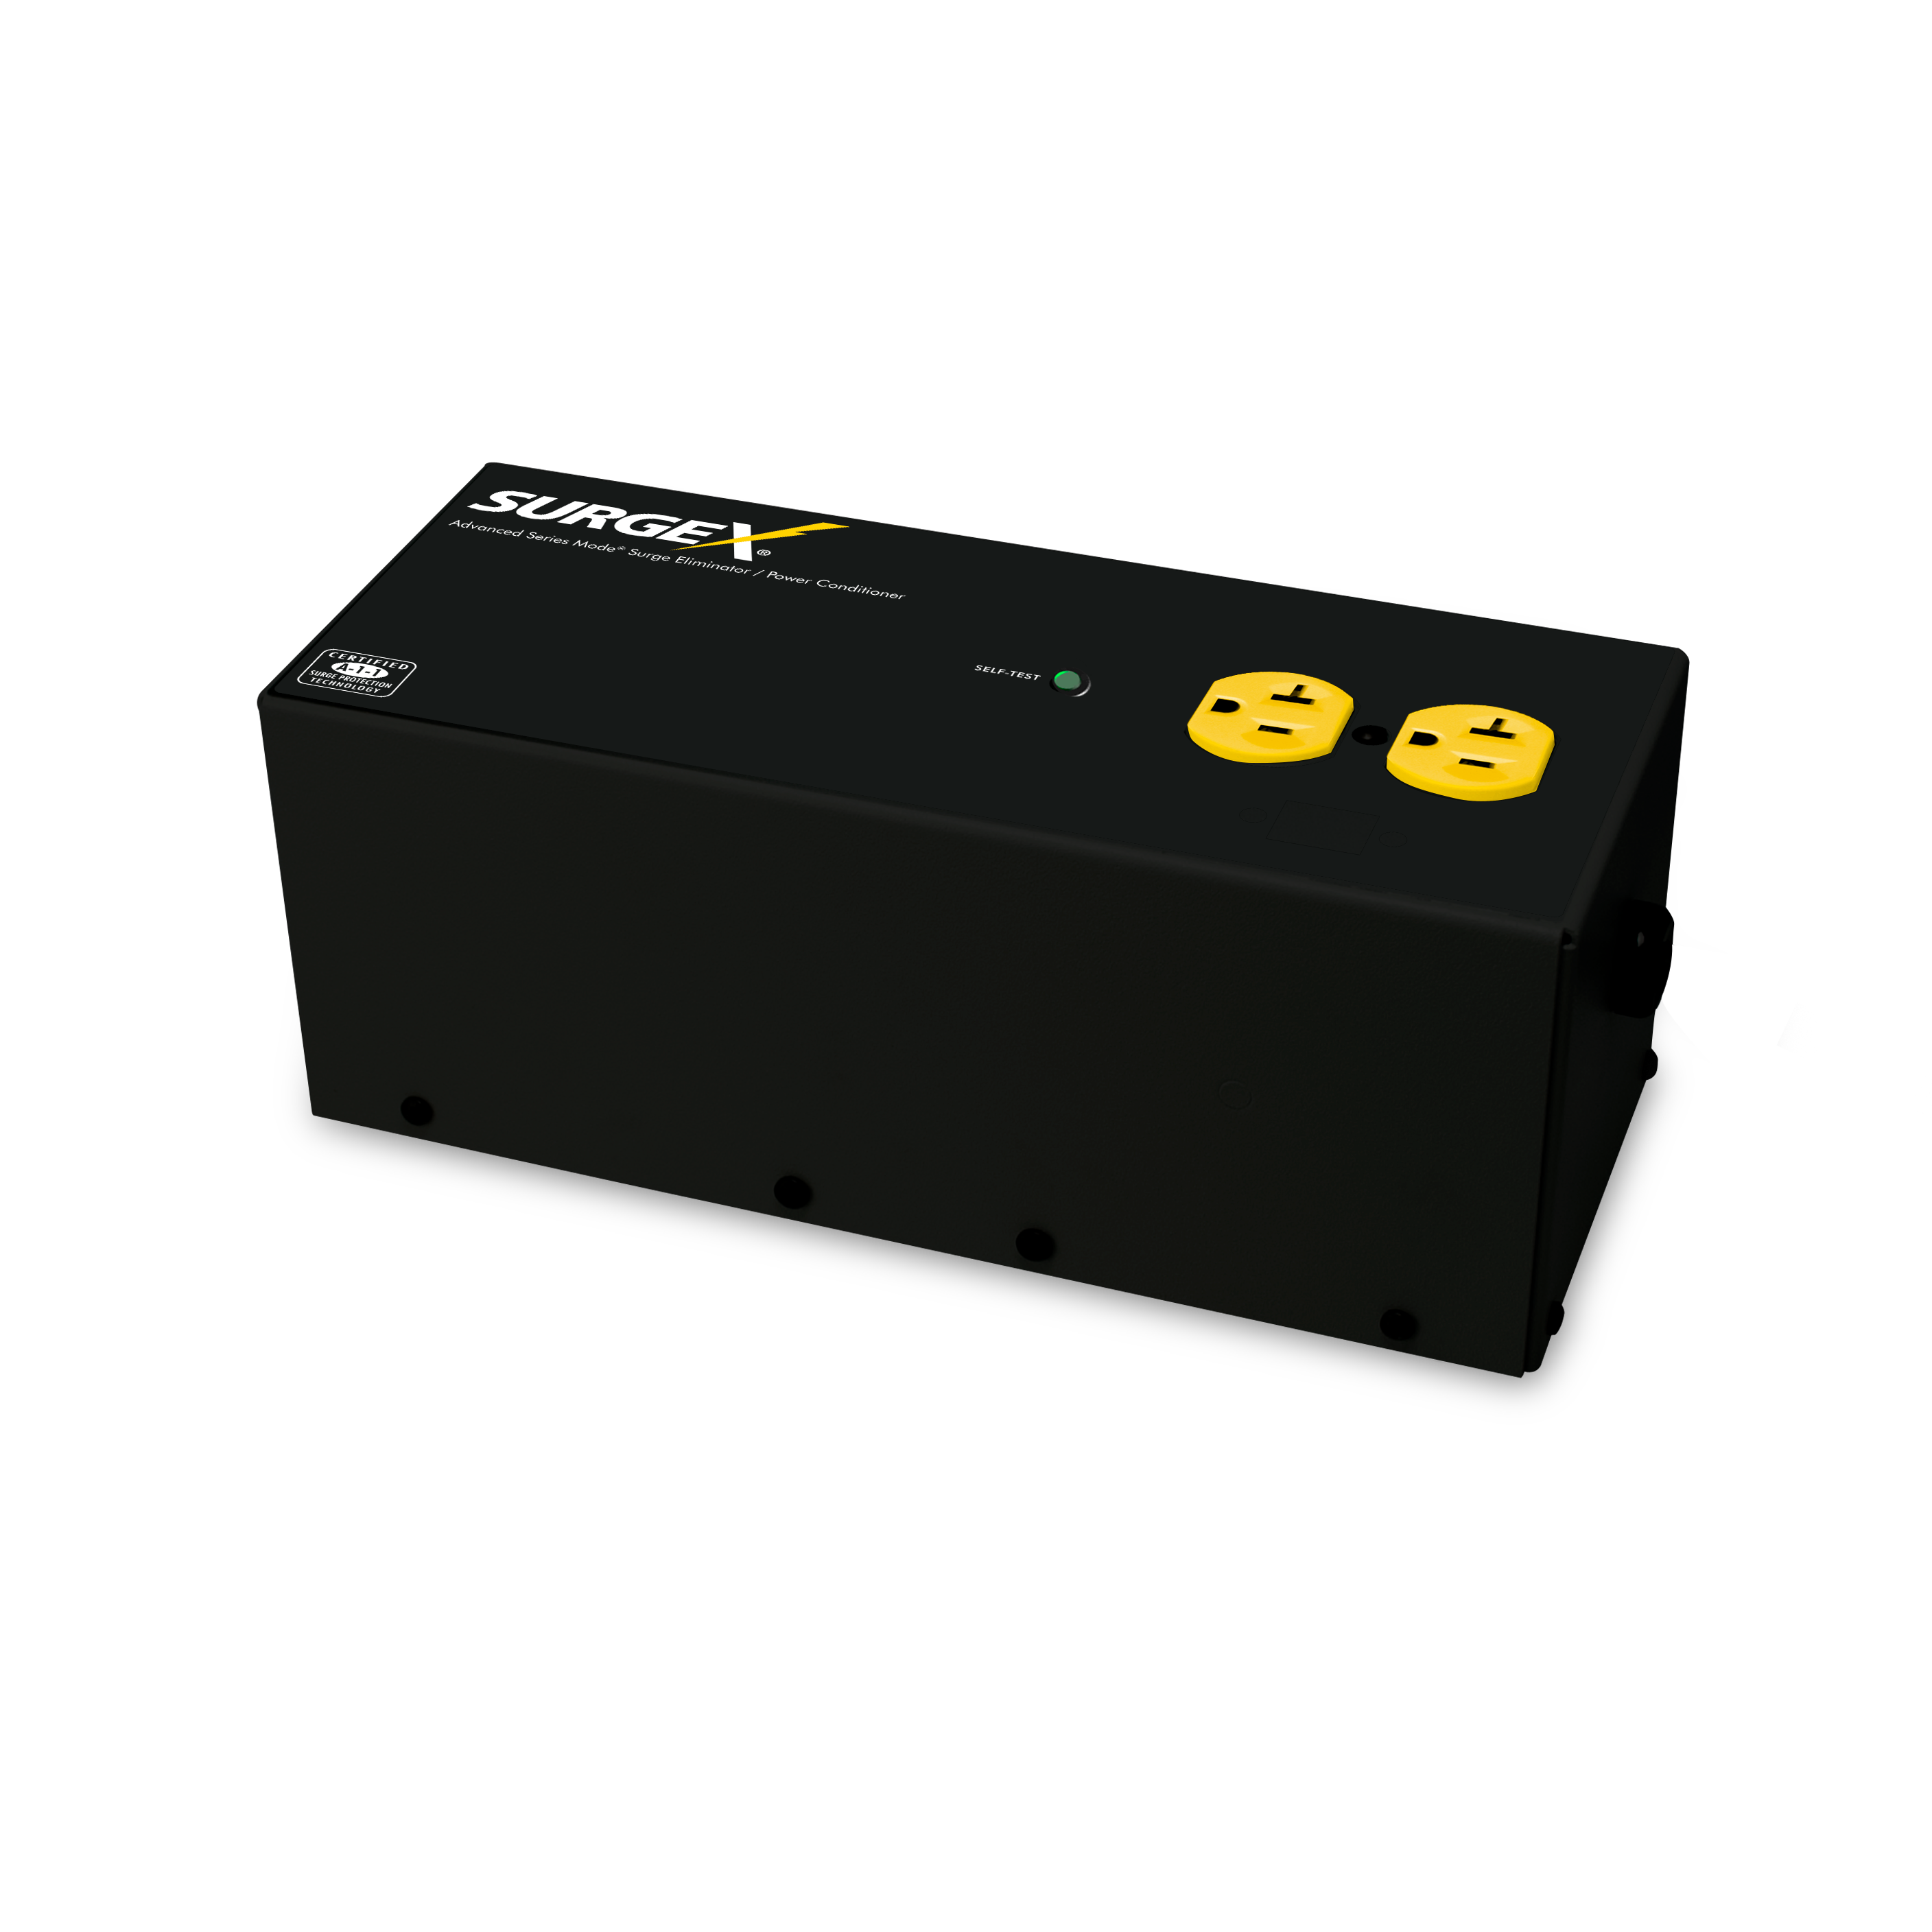 SA-20 Standalone Surge Eliminator and Power Conditioner